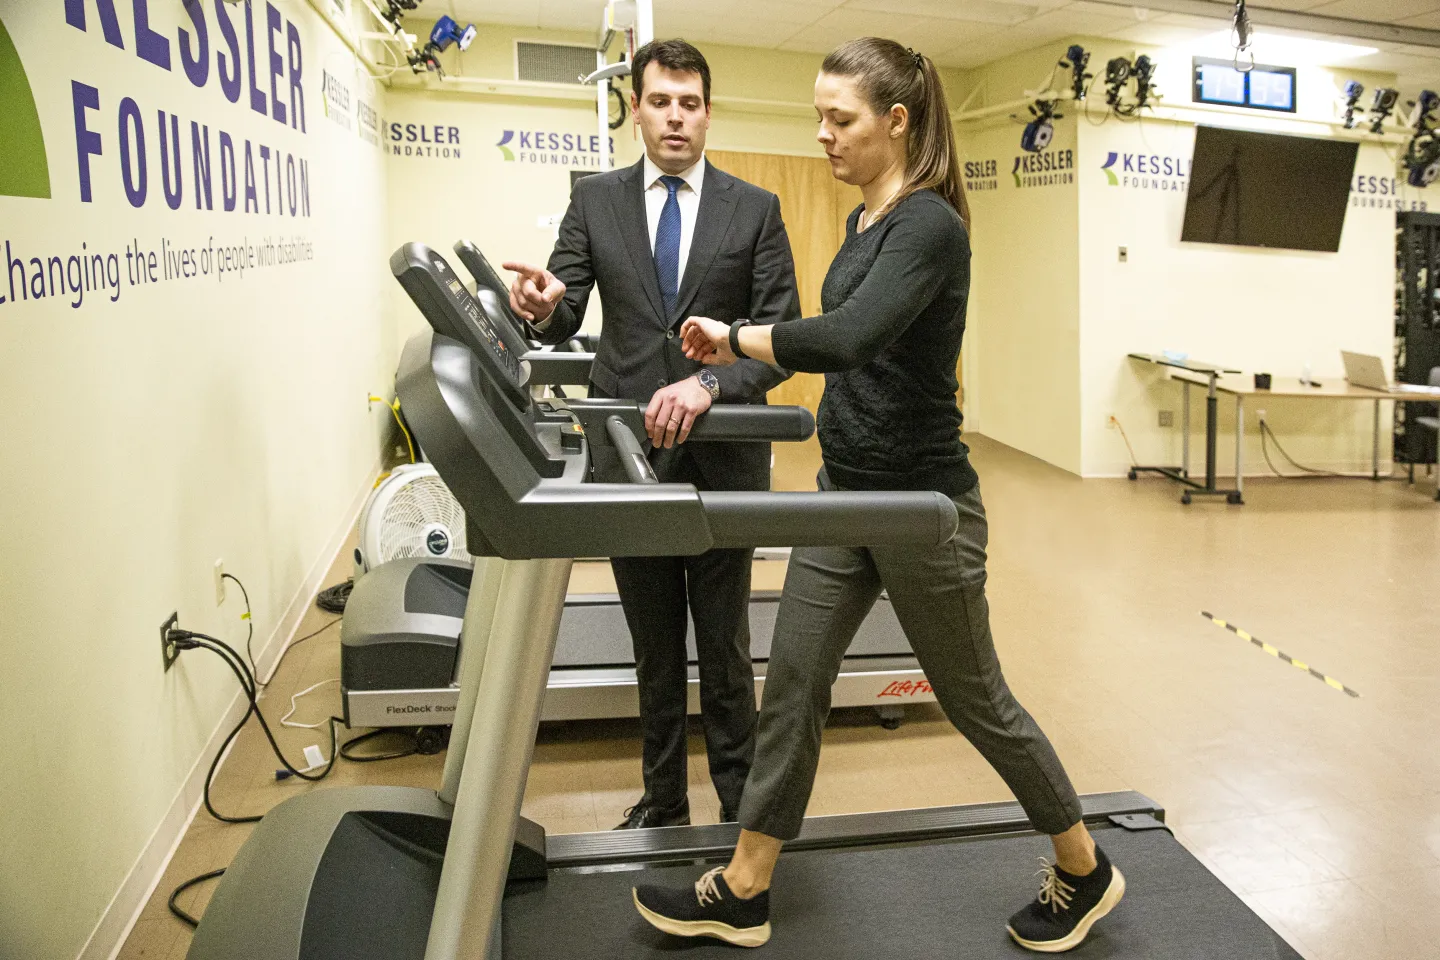 Woman on treadmill exercises while male researcher in business suit observes standing next to the machine.